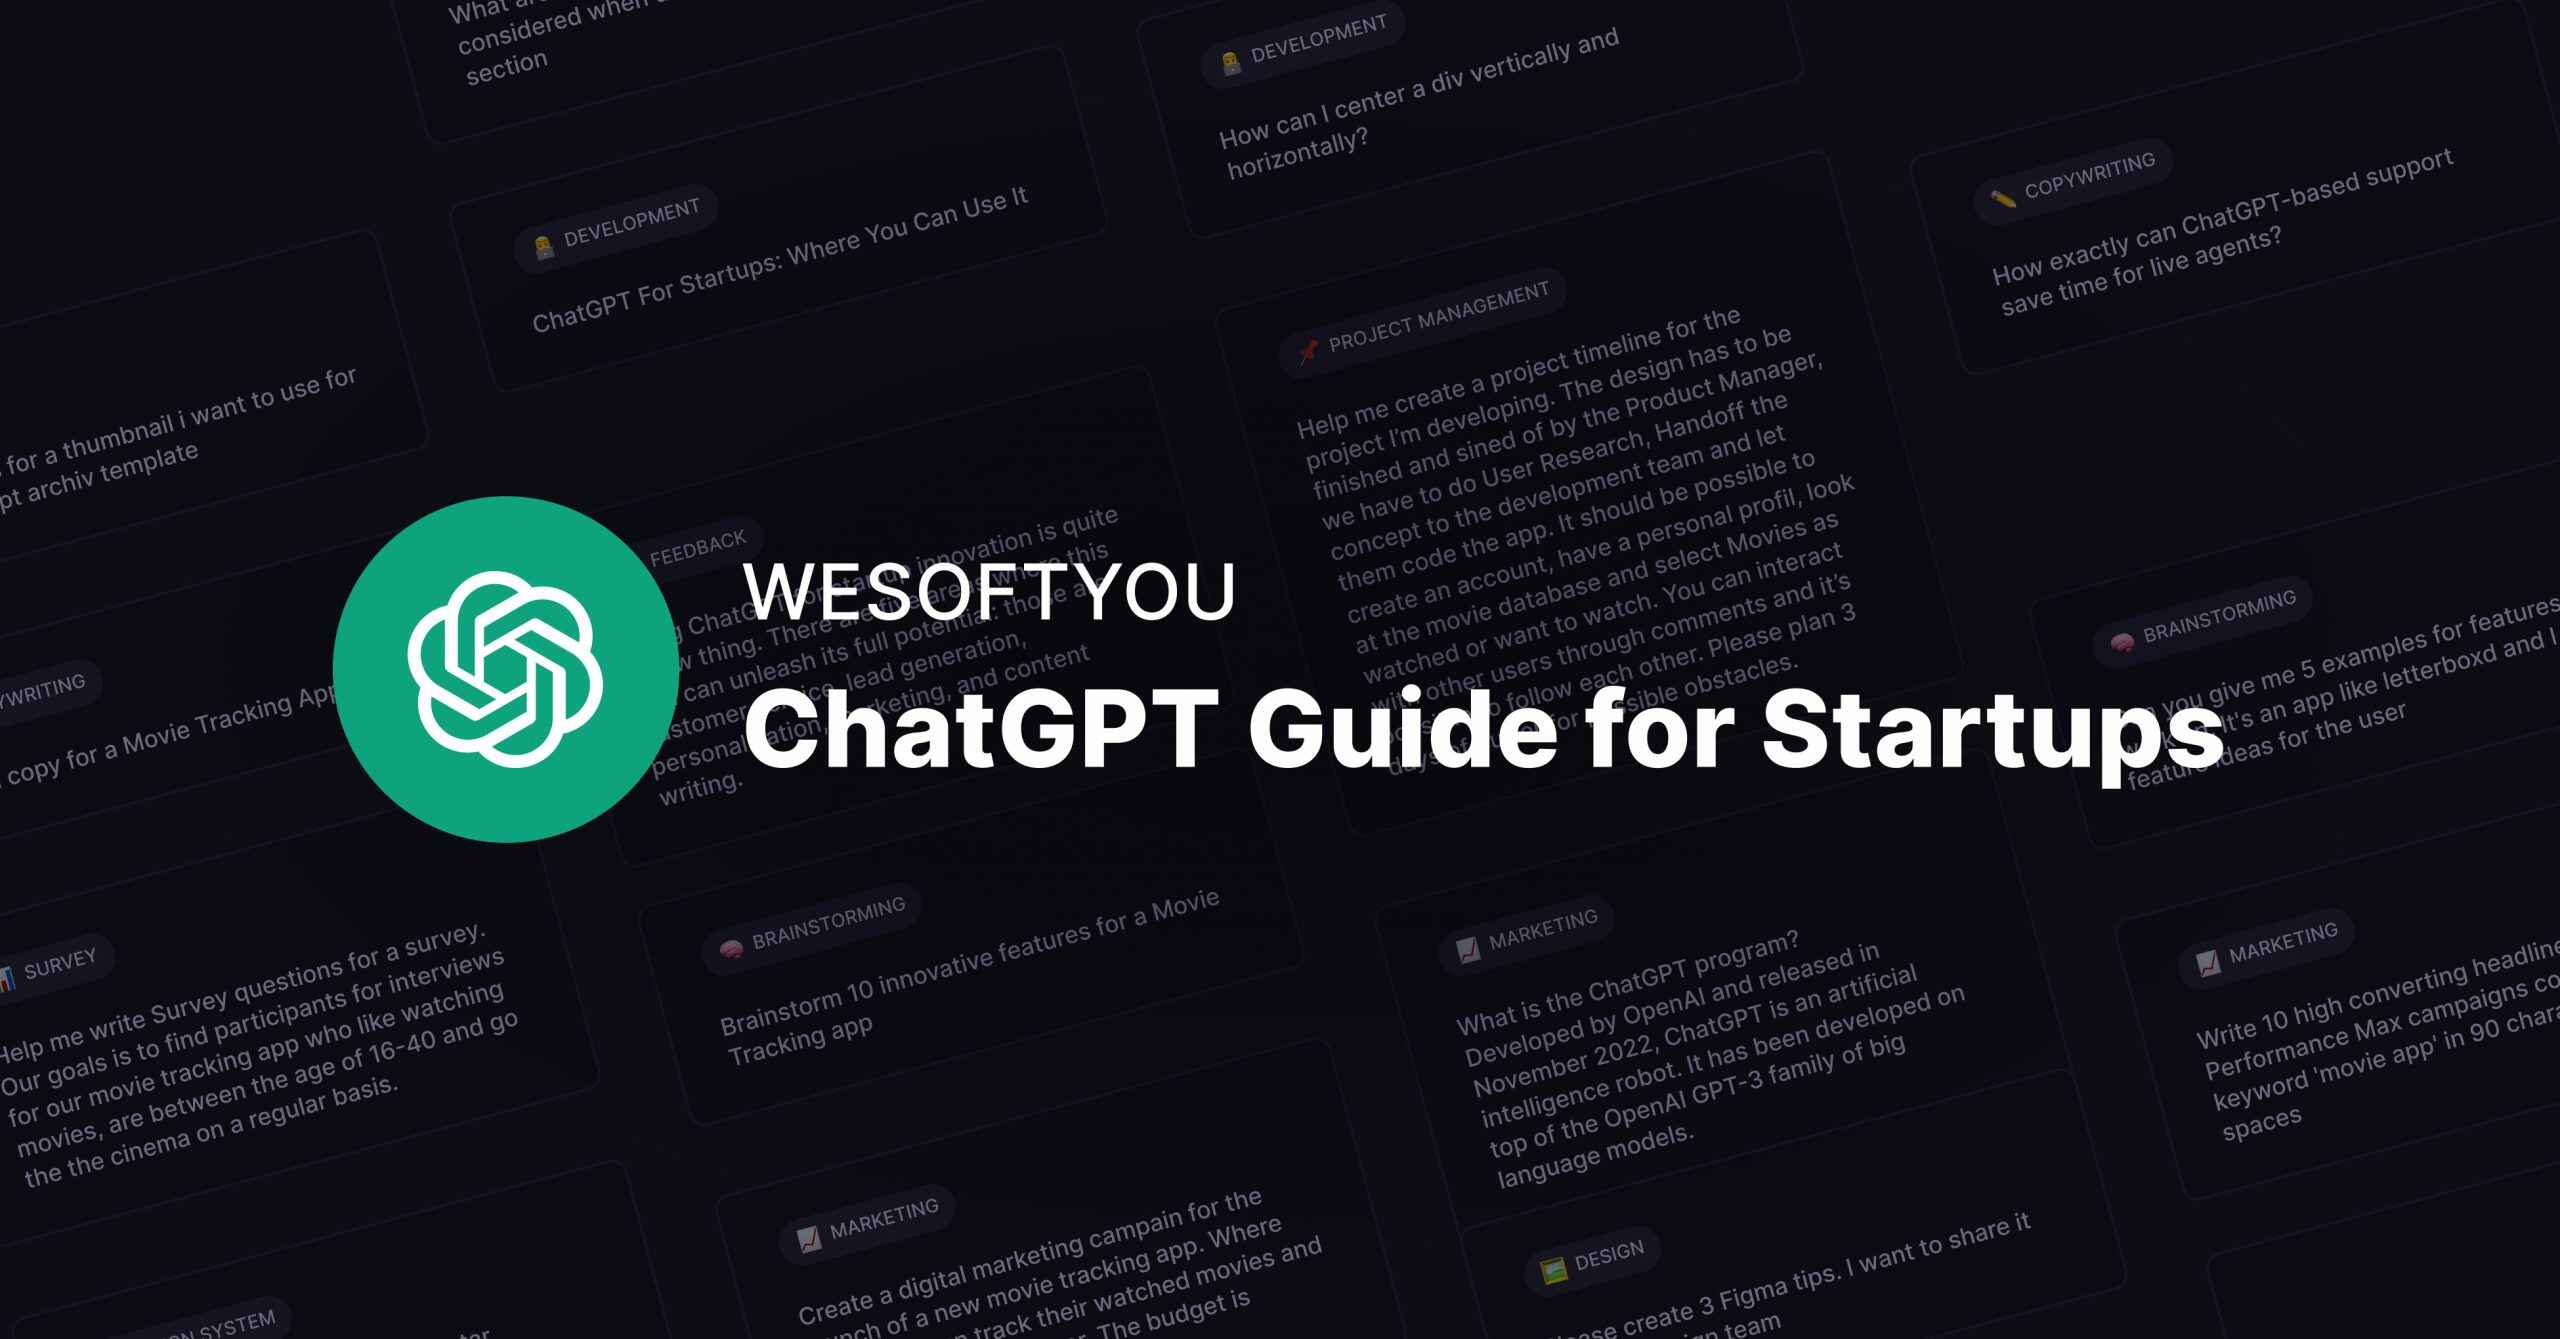 ChatGPT Guide for Product Managers: How AI-Based Chatbot Can Speed up Your Work, image #3